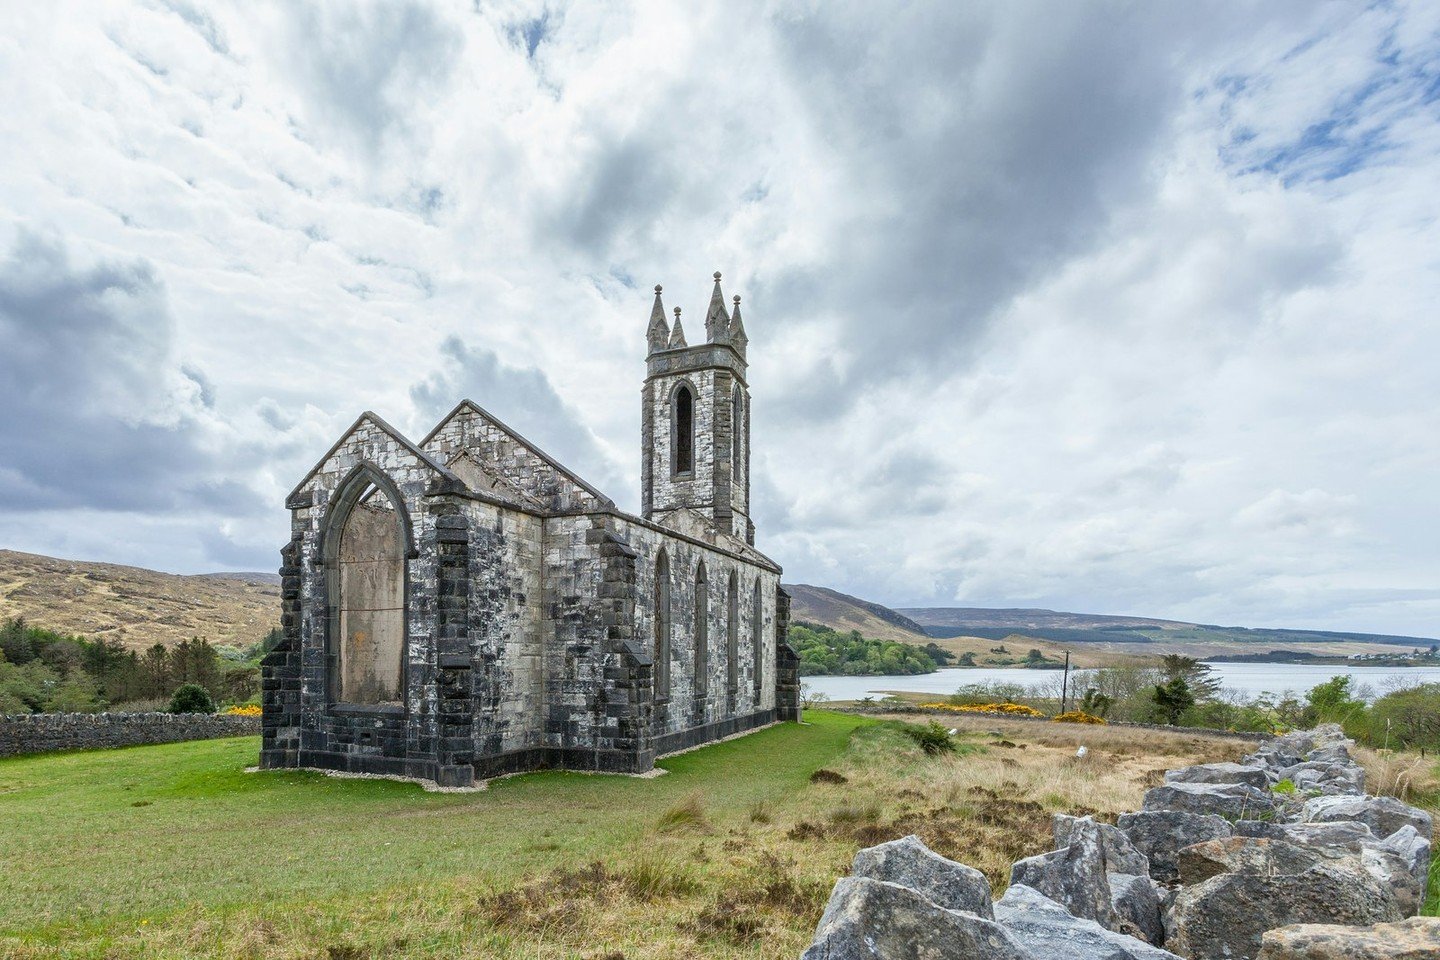 When we plan your trip to Ireland you&rsquo;ll want to step back in time and visit the enchanting Dunlewey Church in County Donegal. Built in 1853, this picturesque church boasts breathtaking views of Dunlewey Lough lade. #TravelIreland #HistoricSite